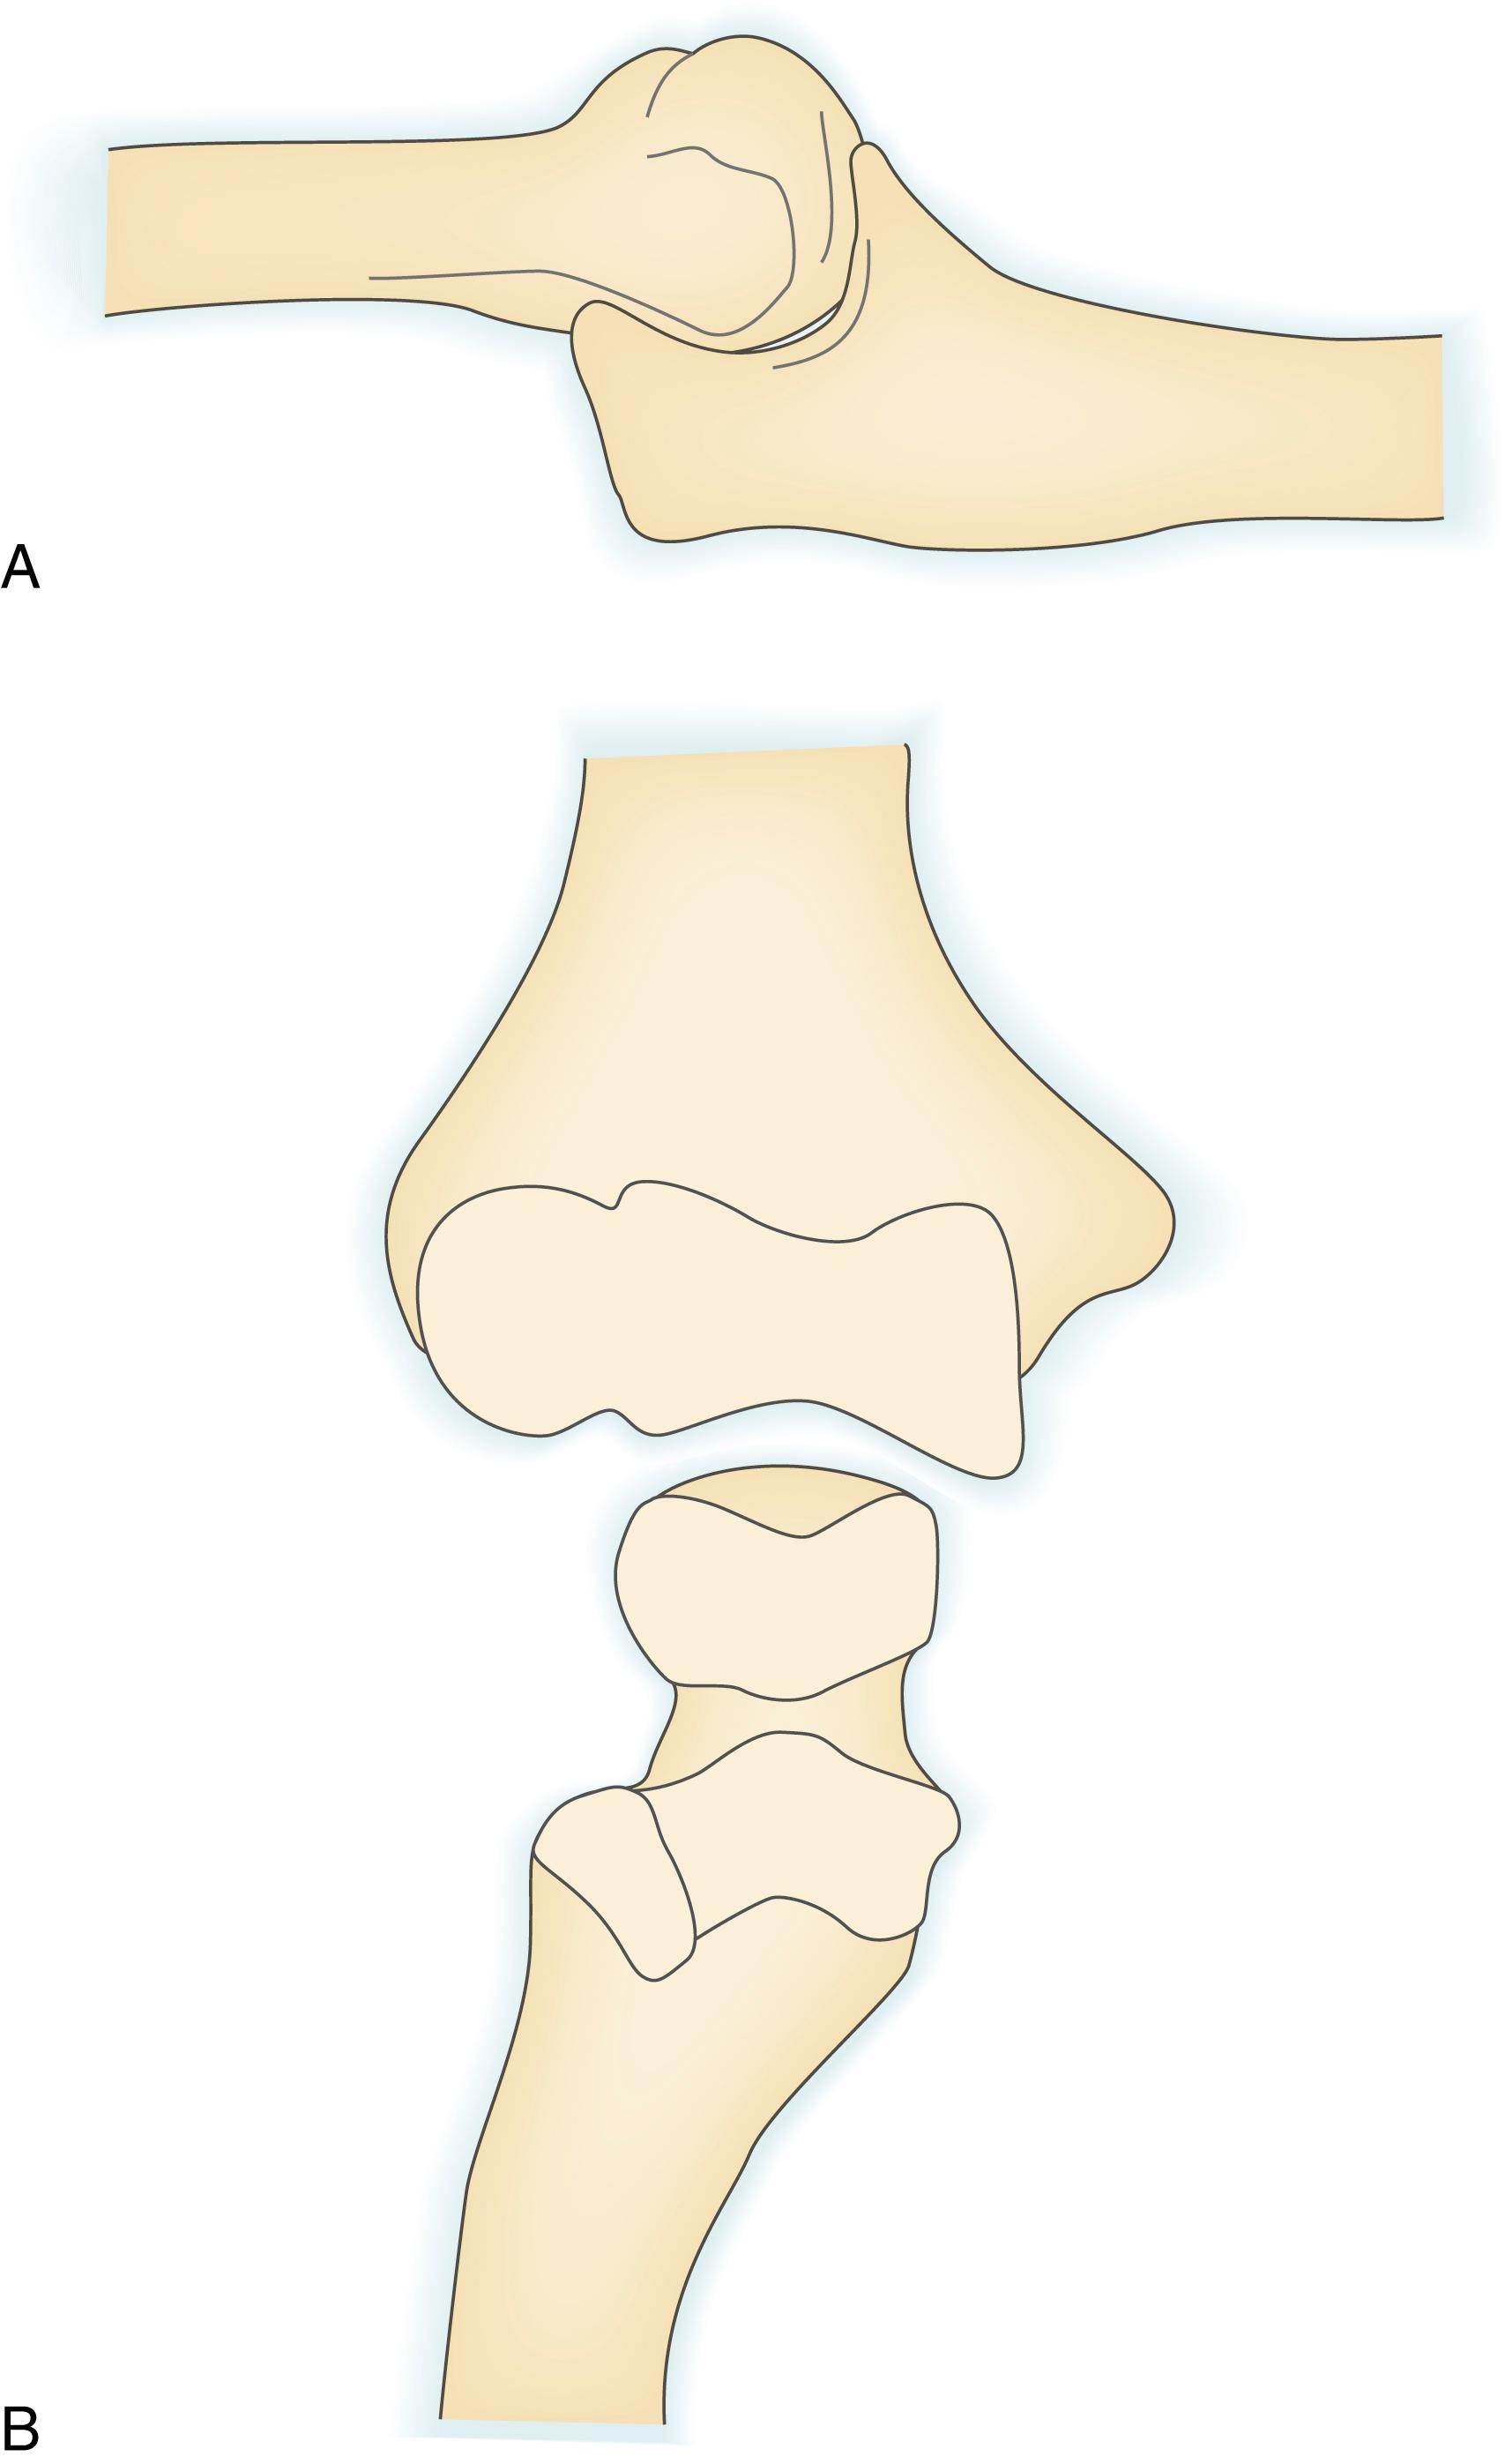 Fig. 20.2, Anatomy of the trochlear notch. A, The trochlear notch of the ulna has a circumference of nearly 180 degrees that tilts somewhat posteriorly. A line drawn between the tips of the olecranon and coronoid processes should create a 30-degree angle with a line parallel to the ulnar shaft. B, The stability of the ulnotrochlear articulation is enhanced by interdigitation of a central ridge in the trochlear notch with a groove in the trochlea. The trochlear notch has separate coronoid and olecranon articular facets with an intervening nonarticular area.